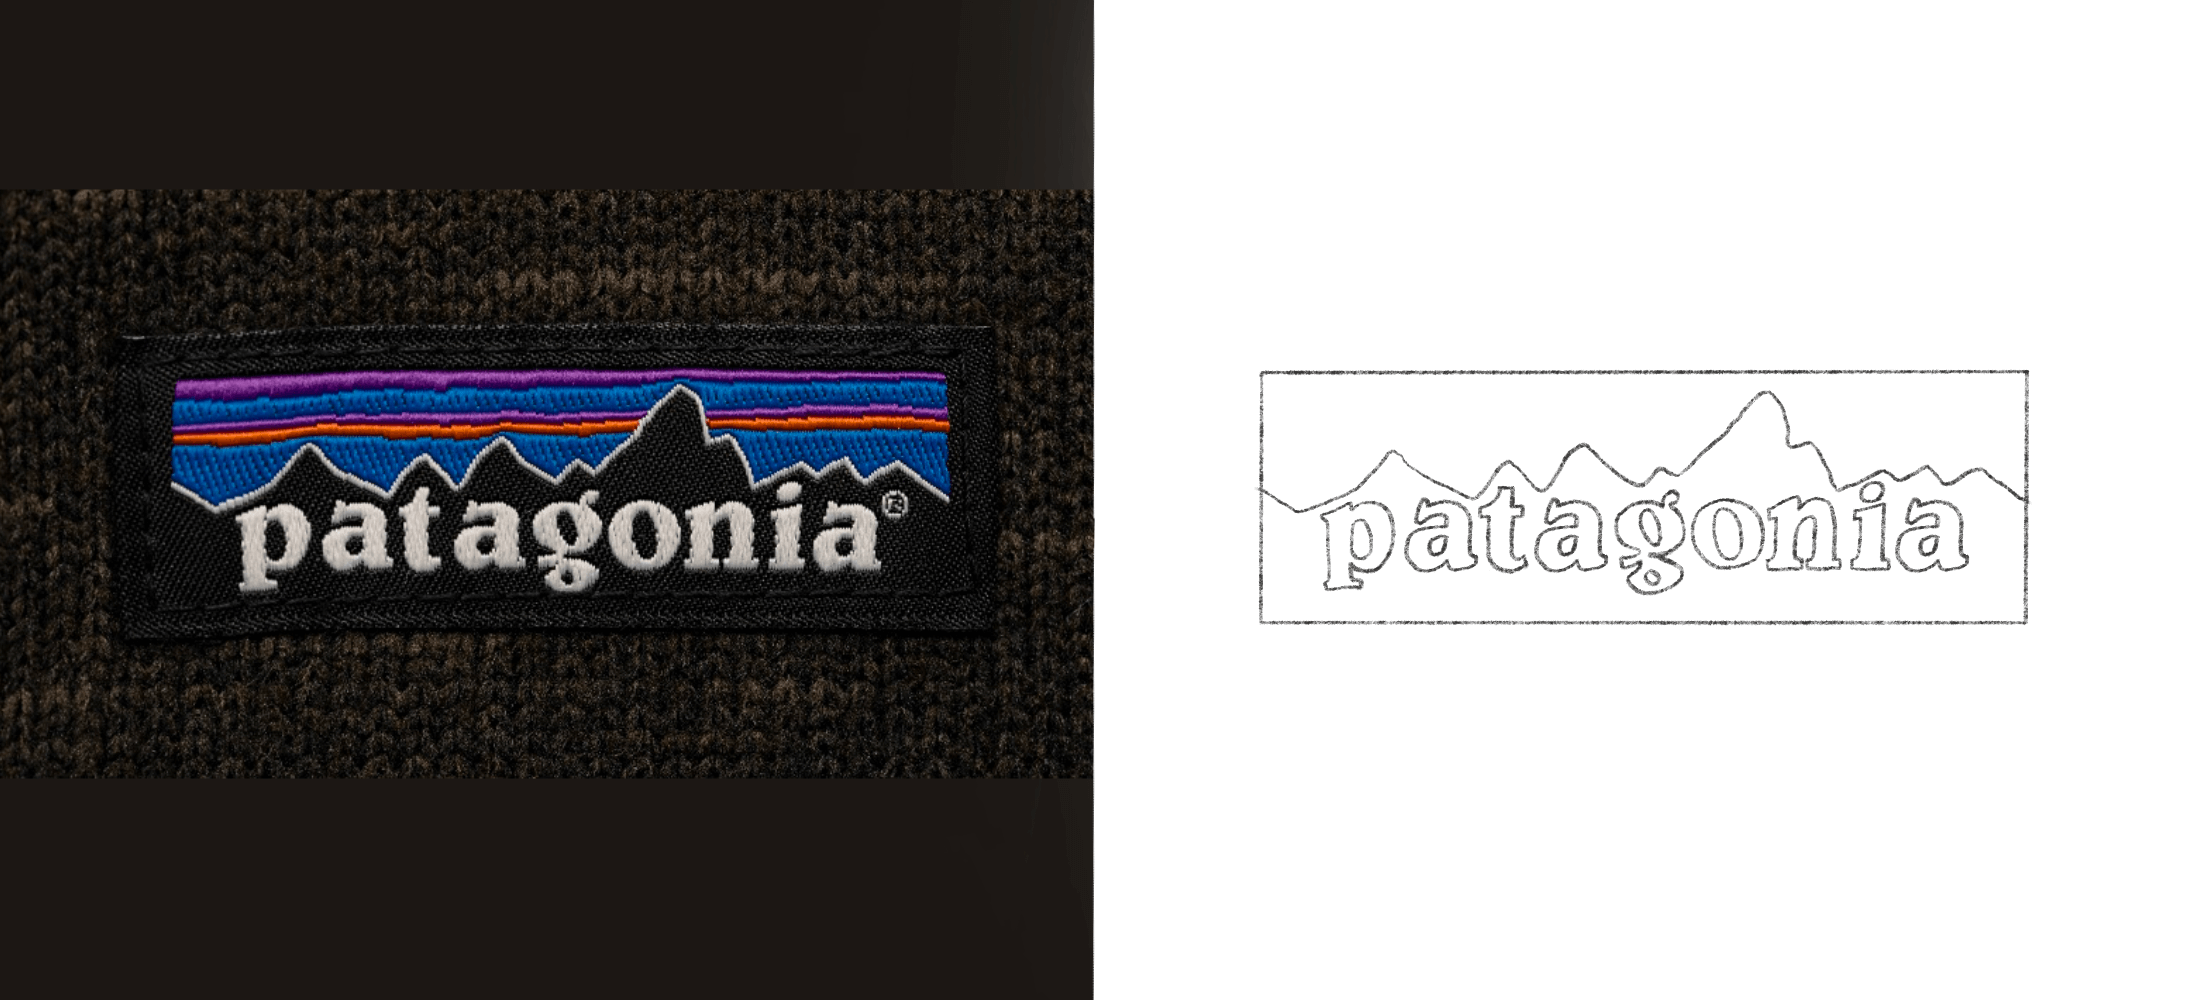 Patagonia logo tag stitched to a black Patagonia sweater alongside a drawn version of the Patagonia logo